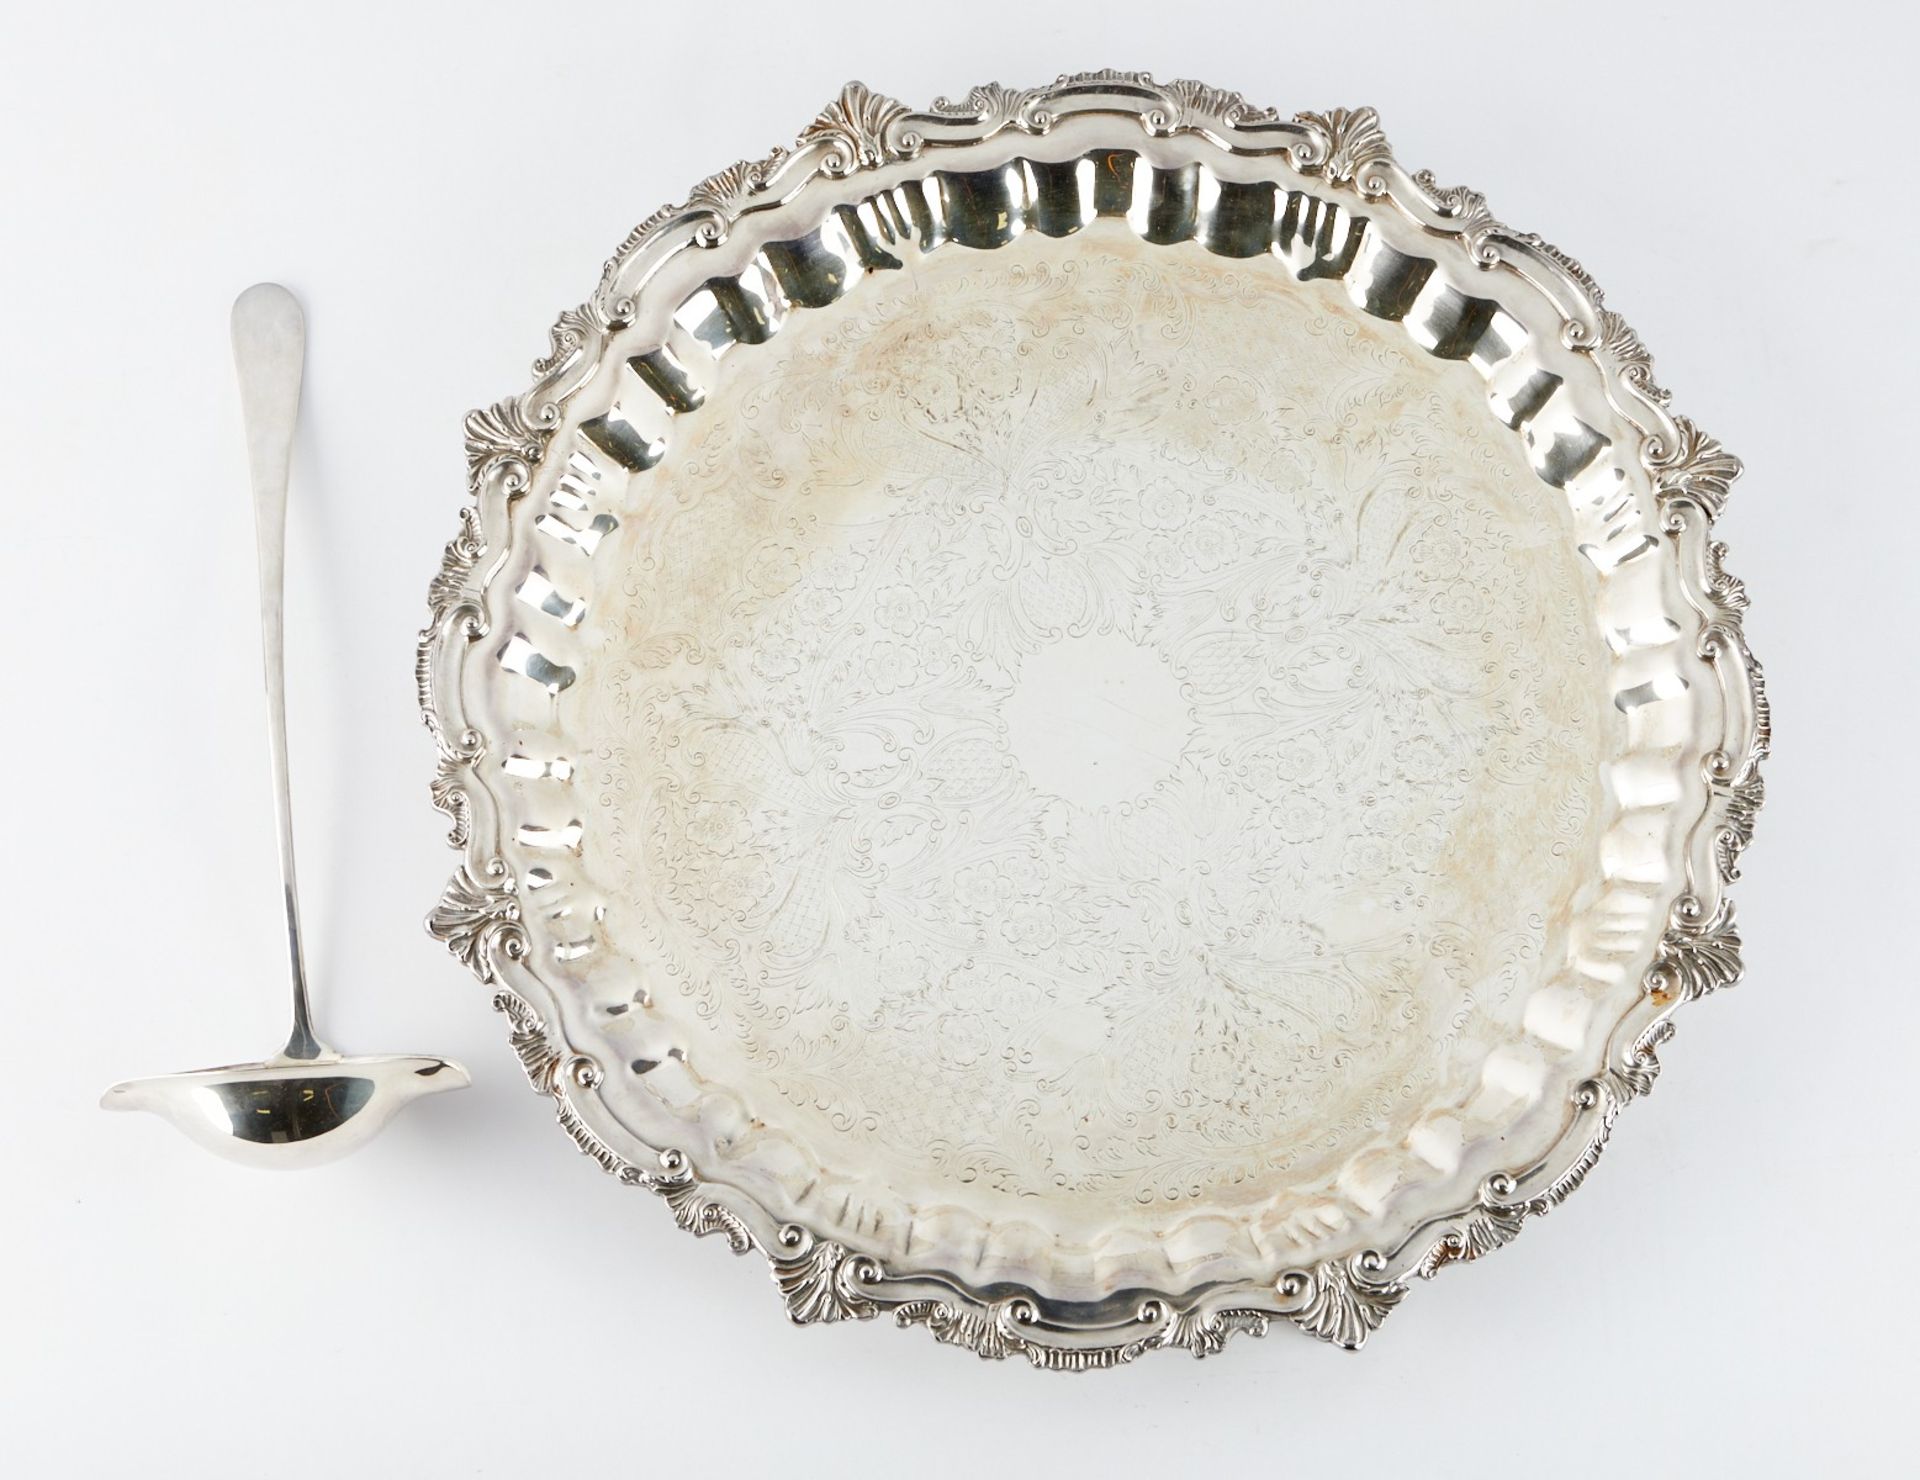 Silver Plated Serving Tray and Ladle